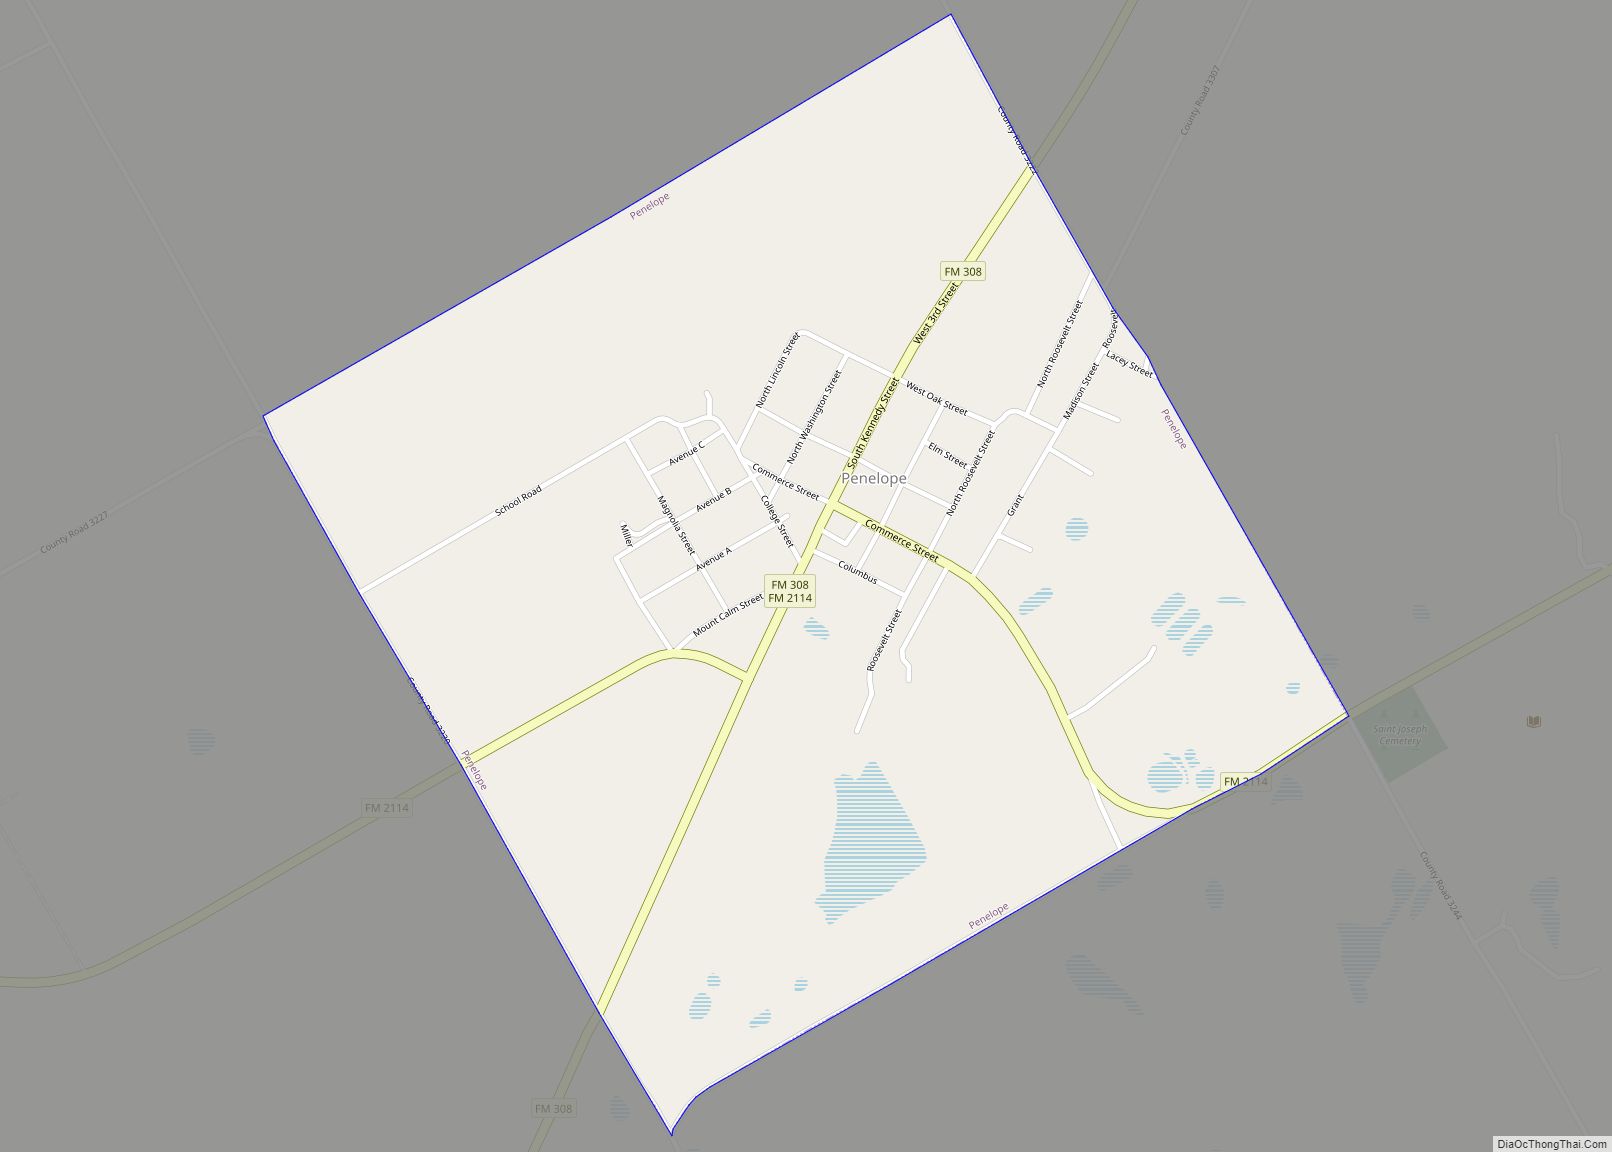 Map of Penelope town